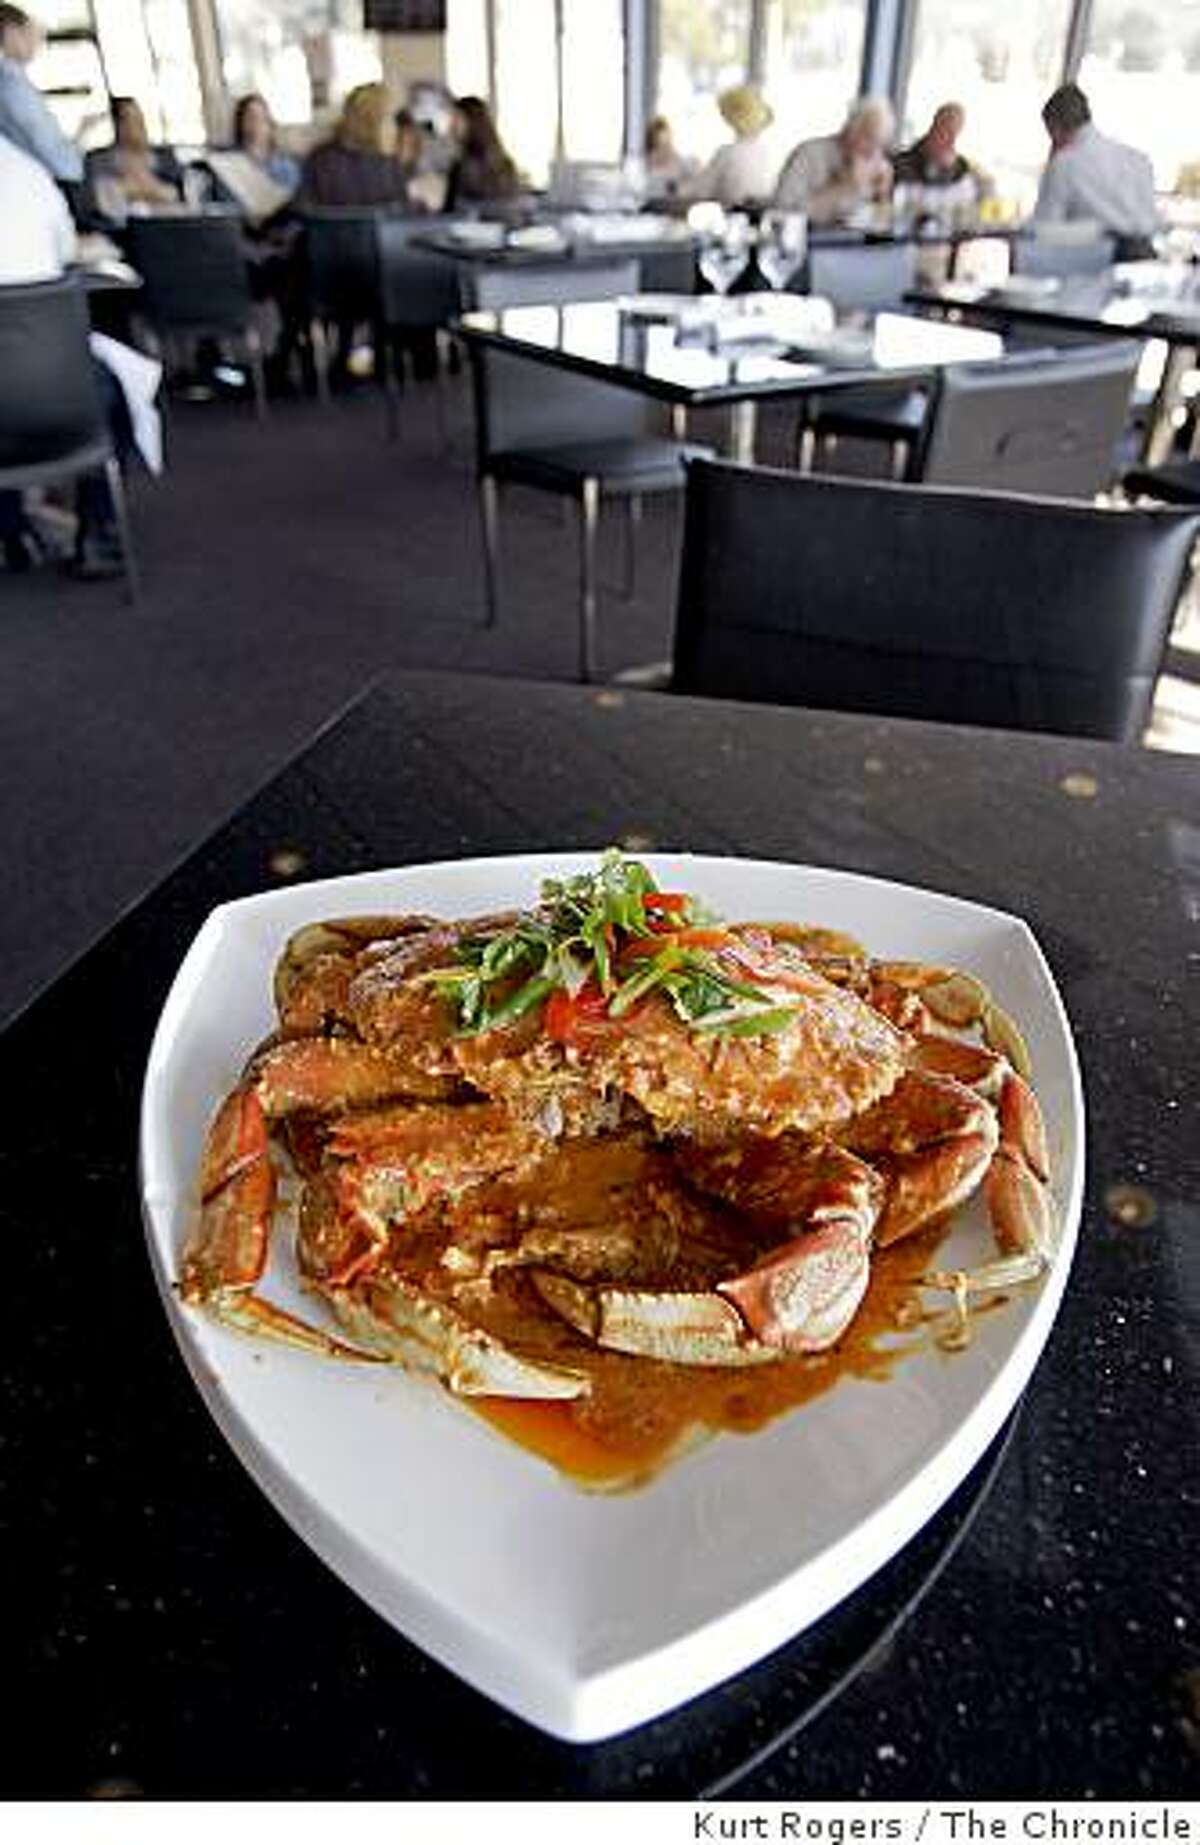 Singapore Chile Crab at the Crab Landing a new restaurant at princeton Harbor.. on Tuesday Feb 3, 2009 in Half Moon Bay , Calif